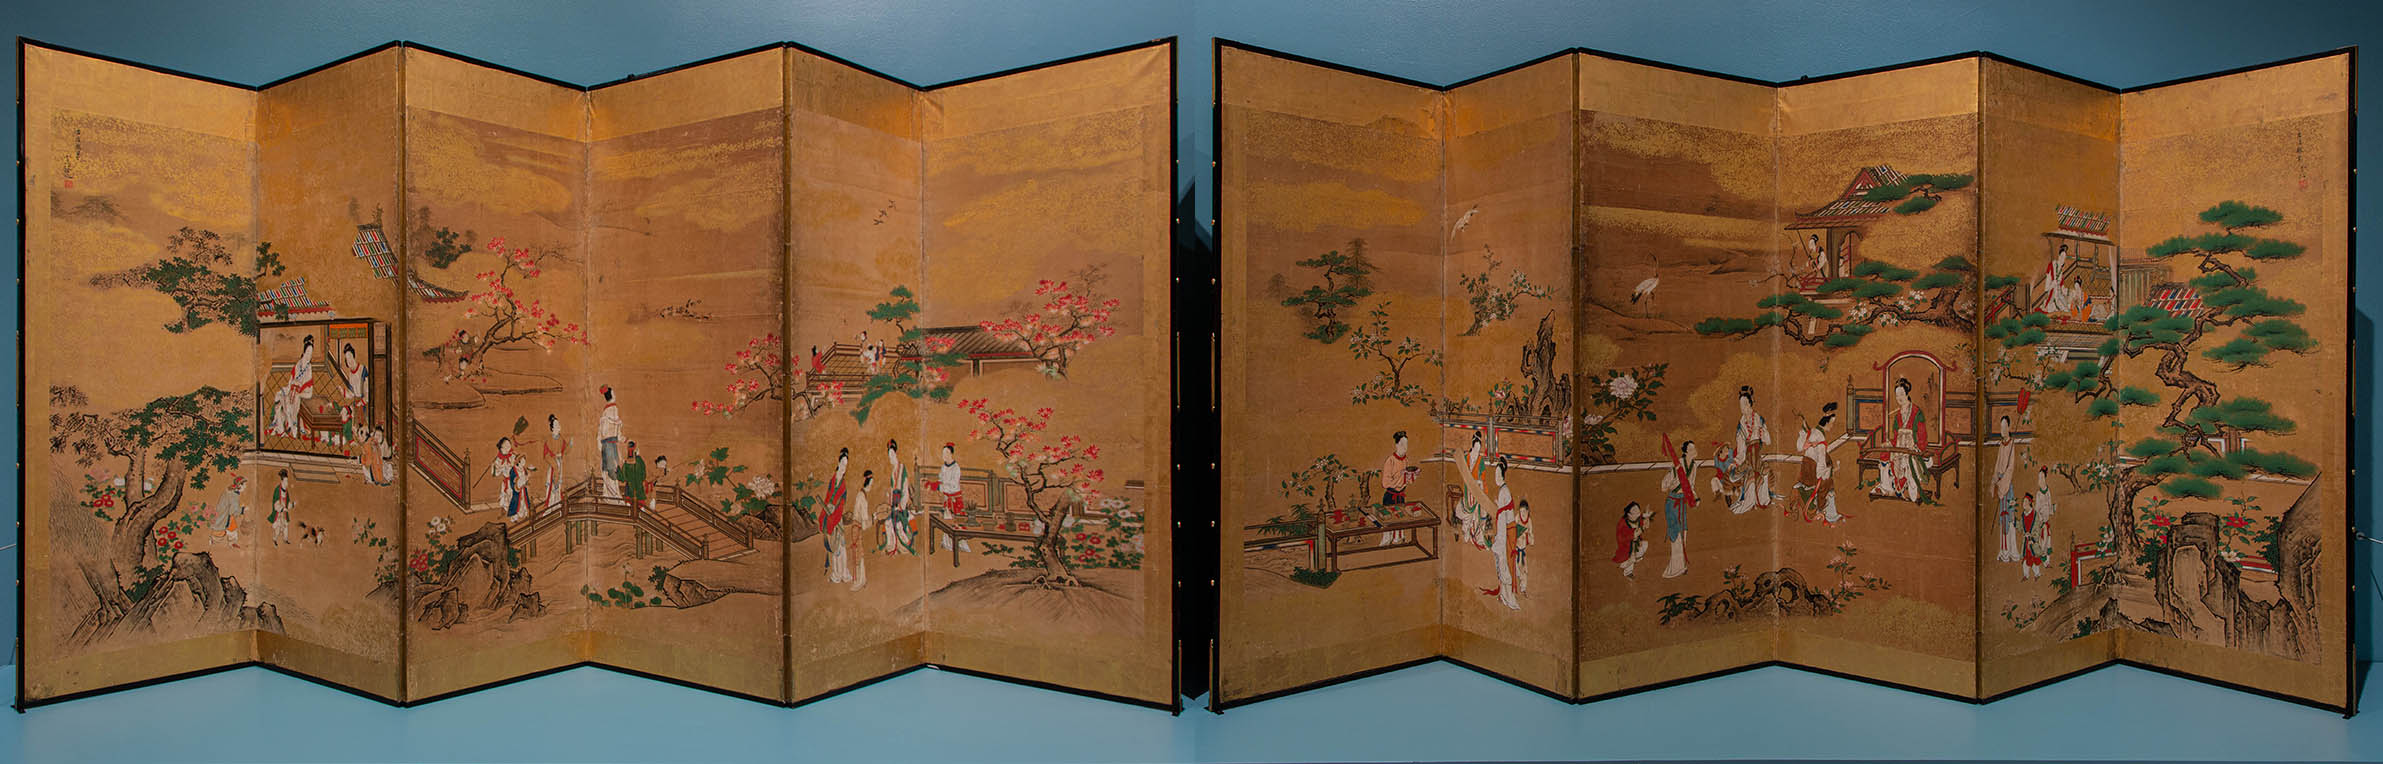 Japanese, 1636–1713, The Four Accomplishments, 1704–13 Japanese ink, gouache, paper, wood, silk, and gold leaf